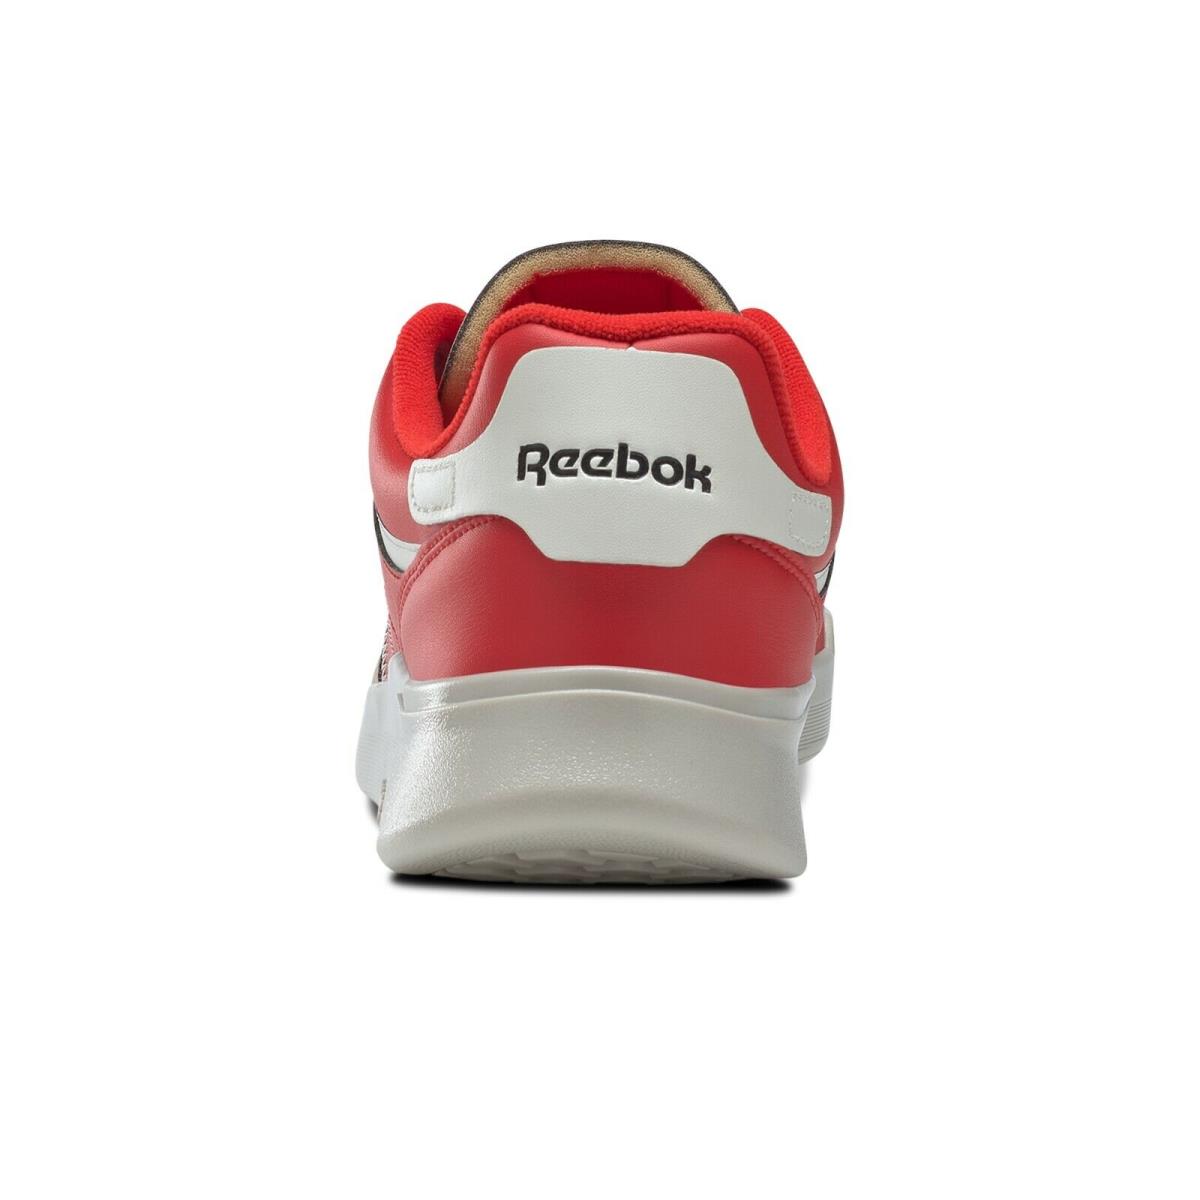 Reebok shoes Keith Haring - Red 2